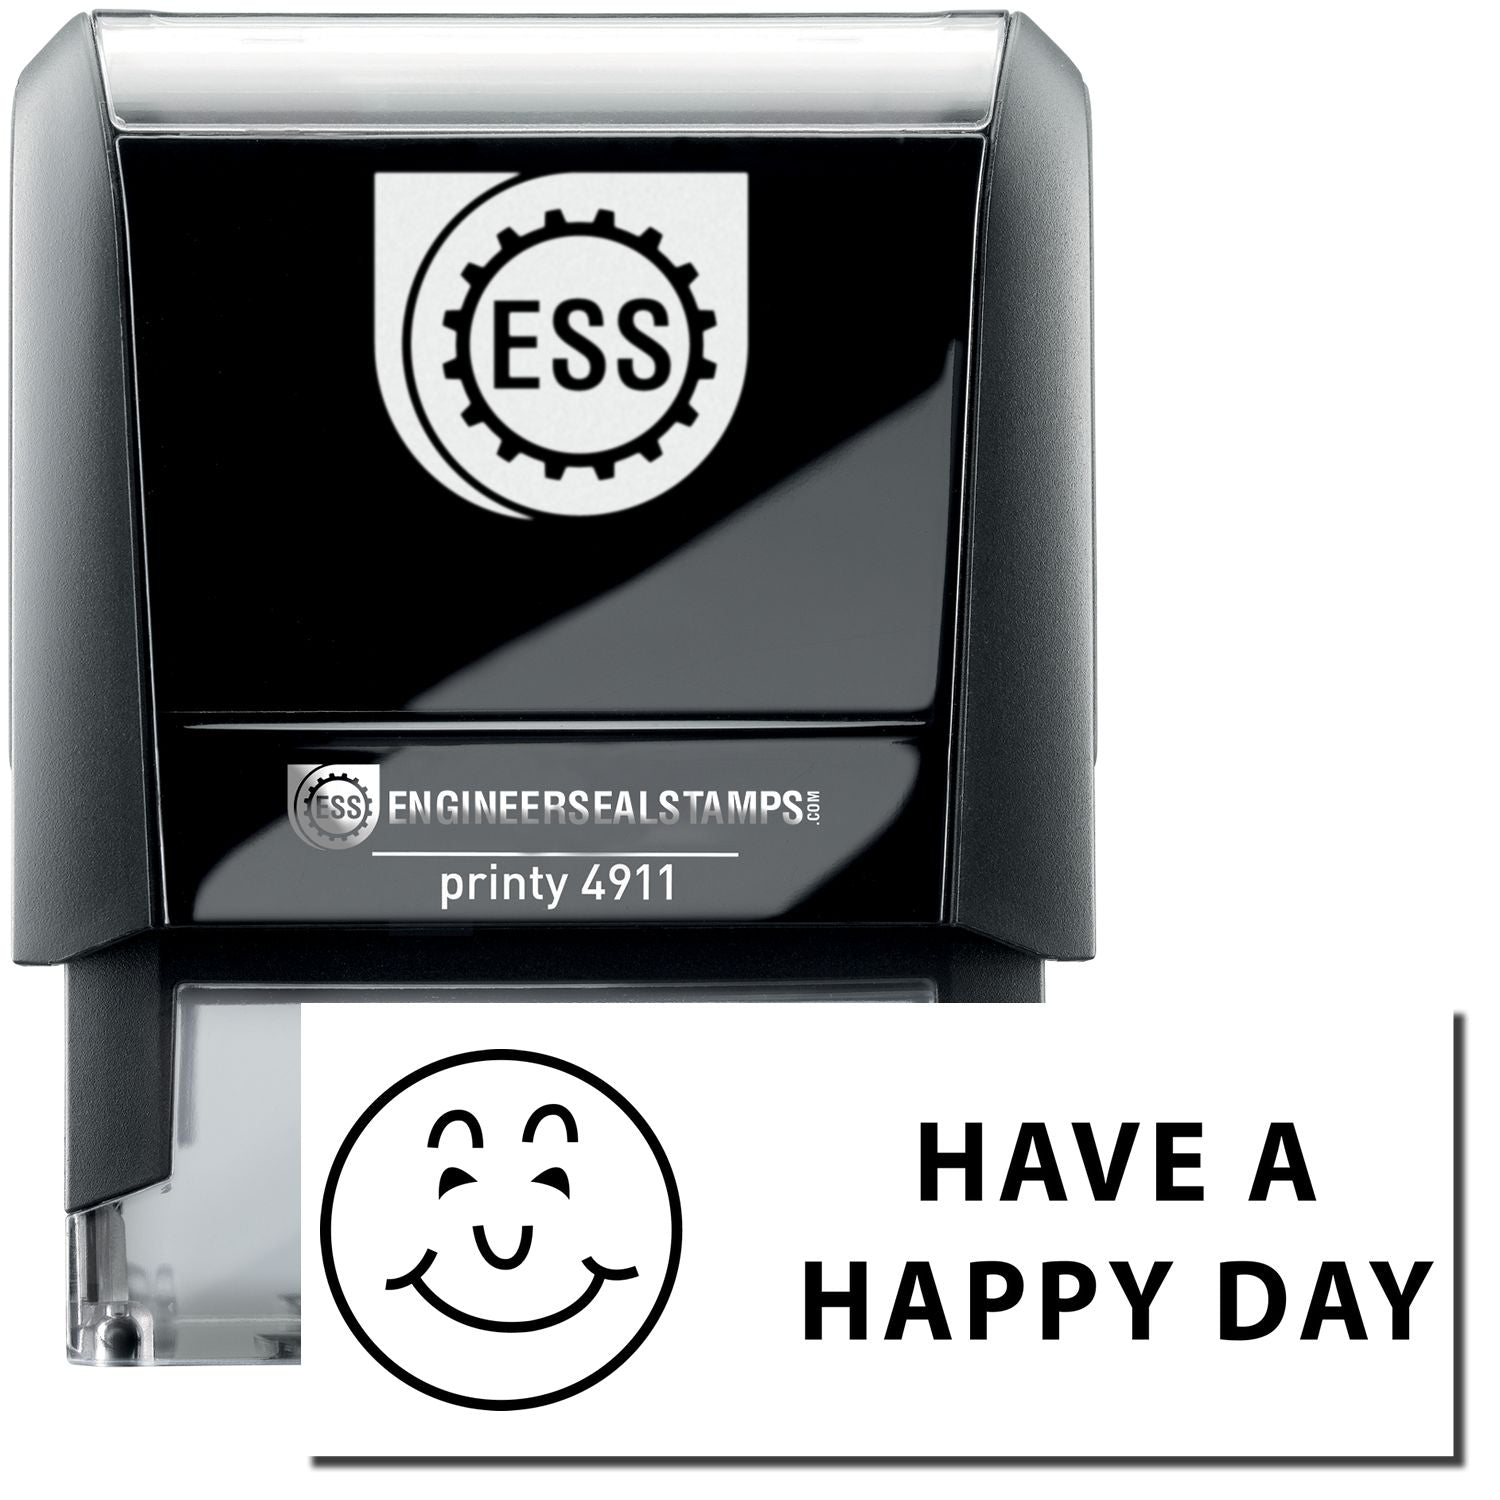 A self-inking stamp with a stamped image showing how the text "HAVE A HAPPY DAY" with an icon of a smiling face on the left is displayed after stamping.